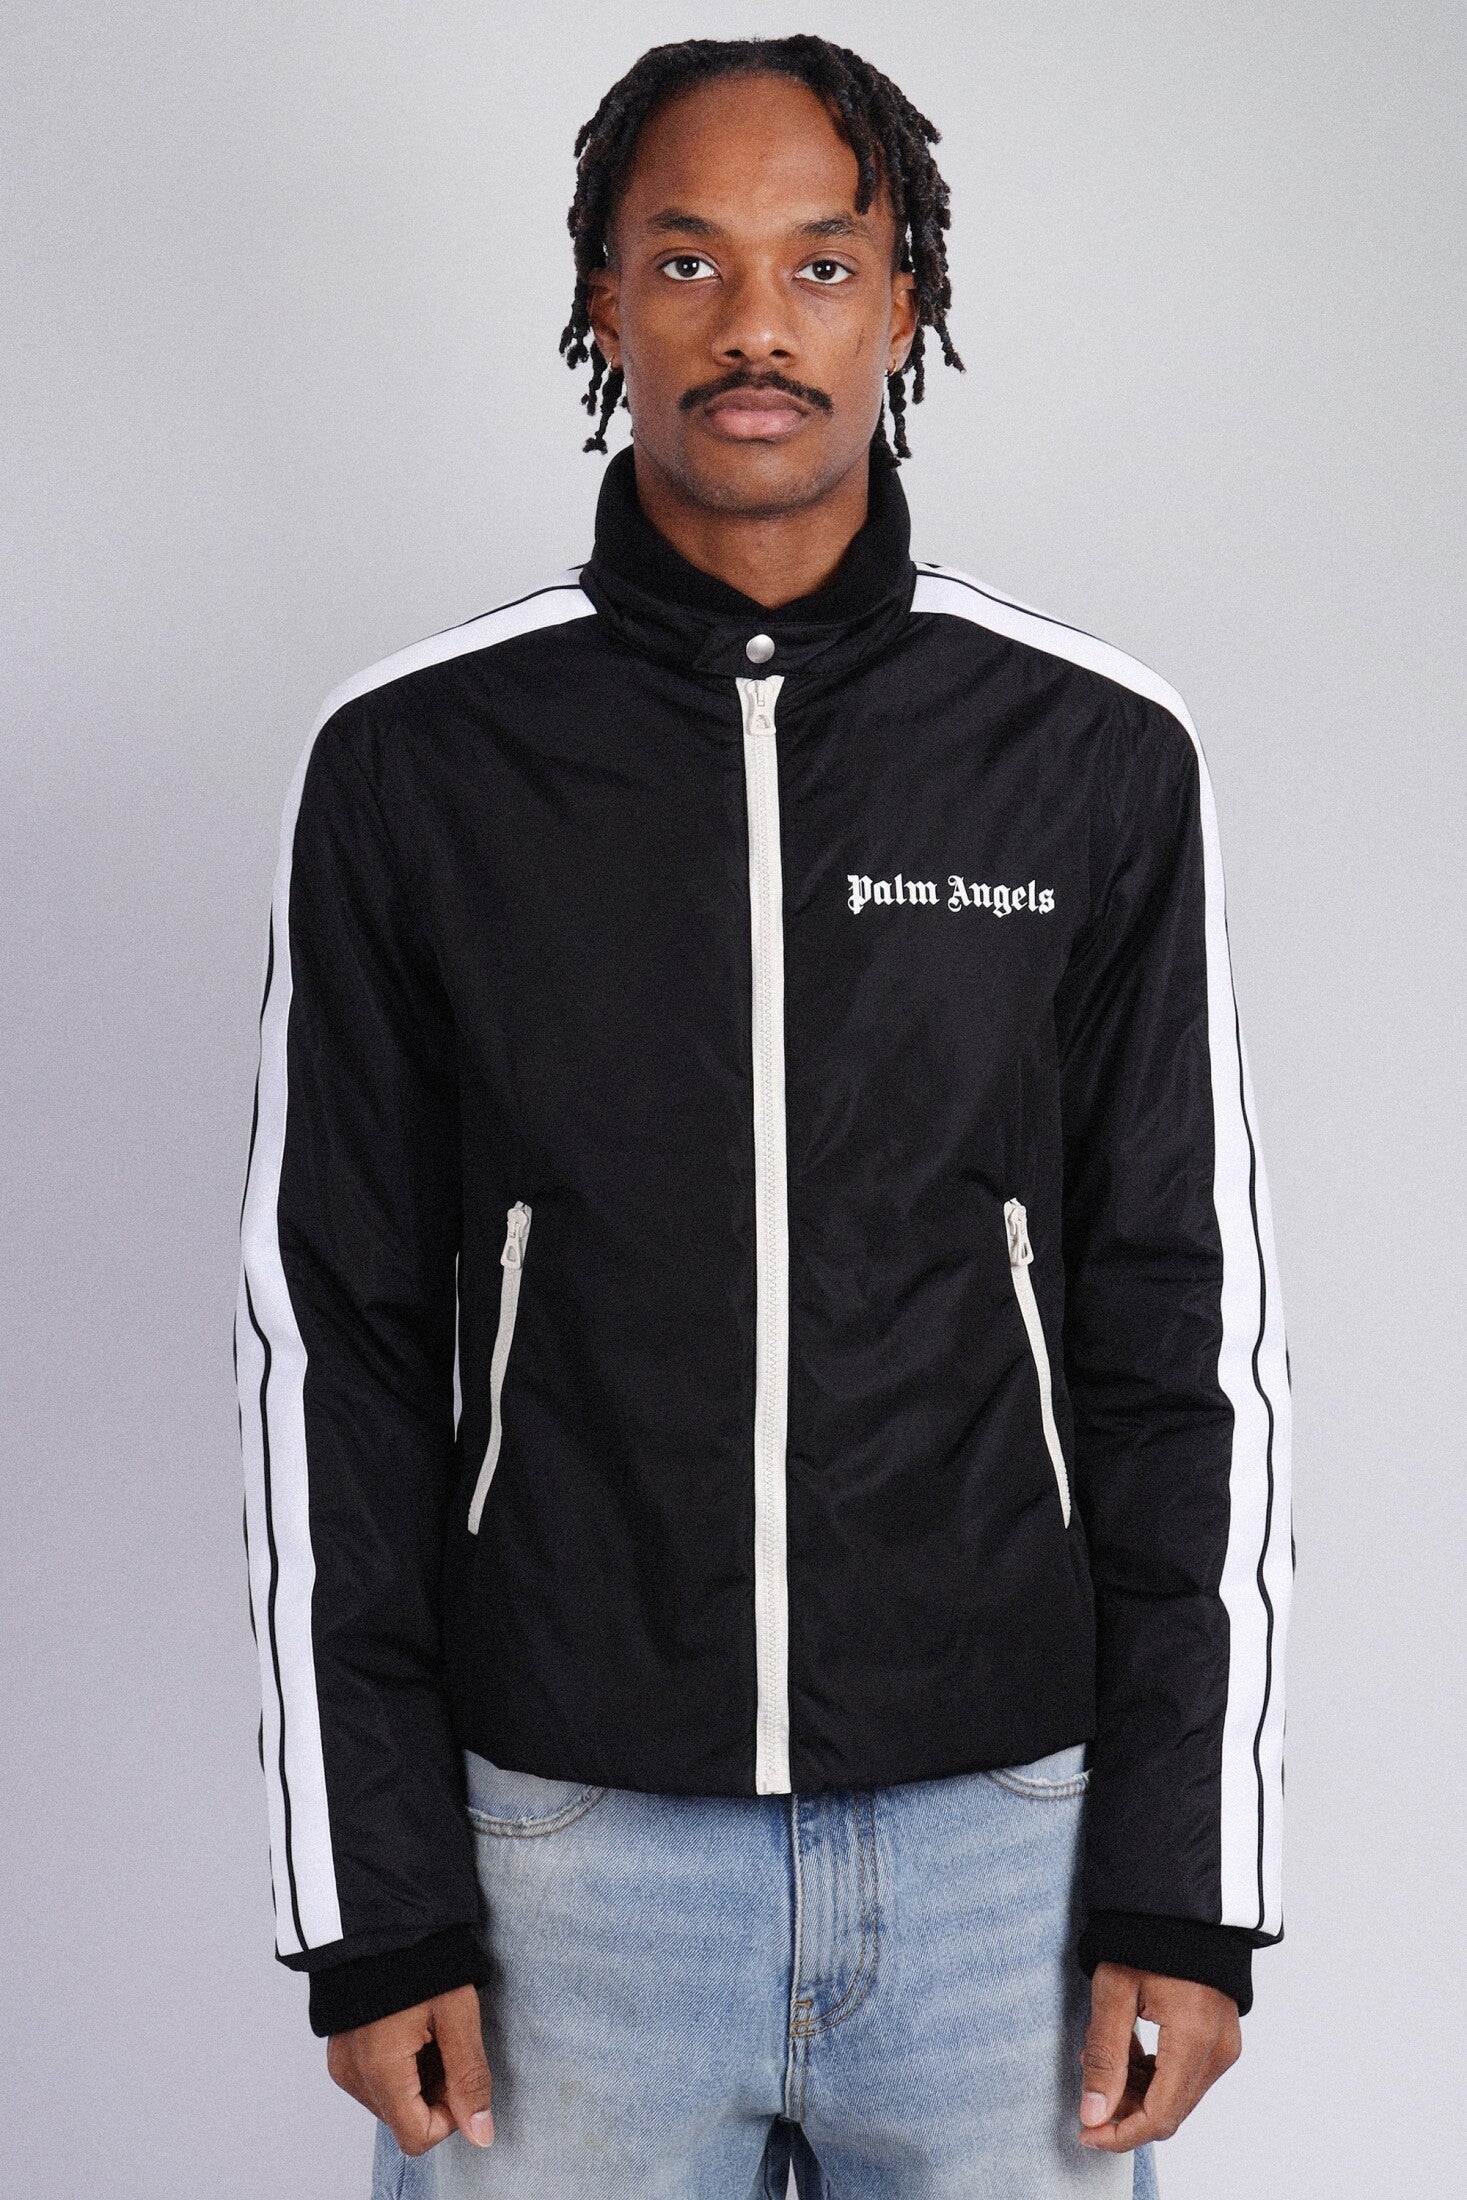 Palm Angels Tracksuit Fit | lupon.gov.ph